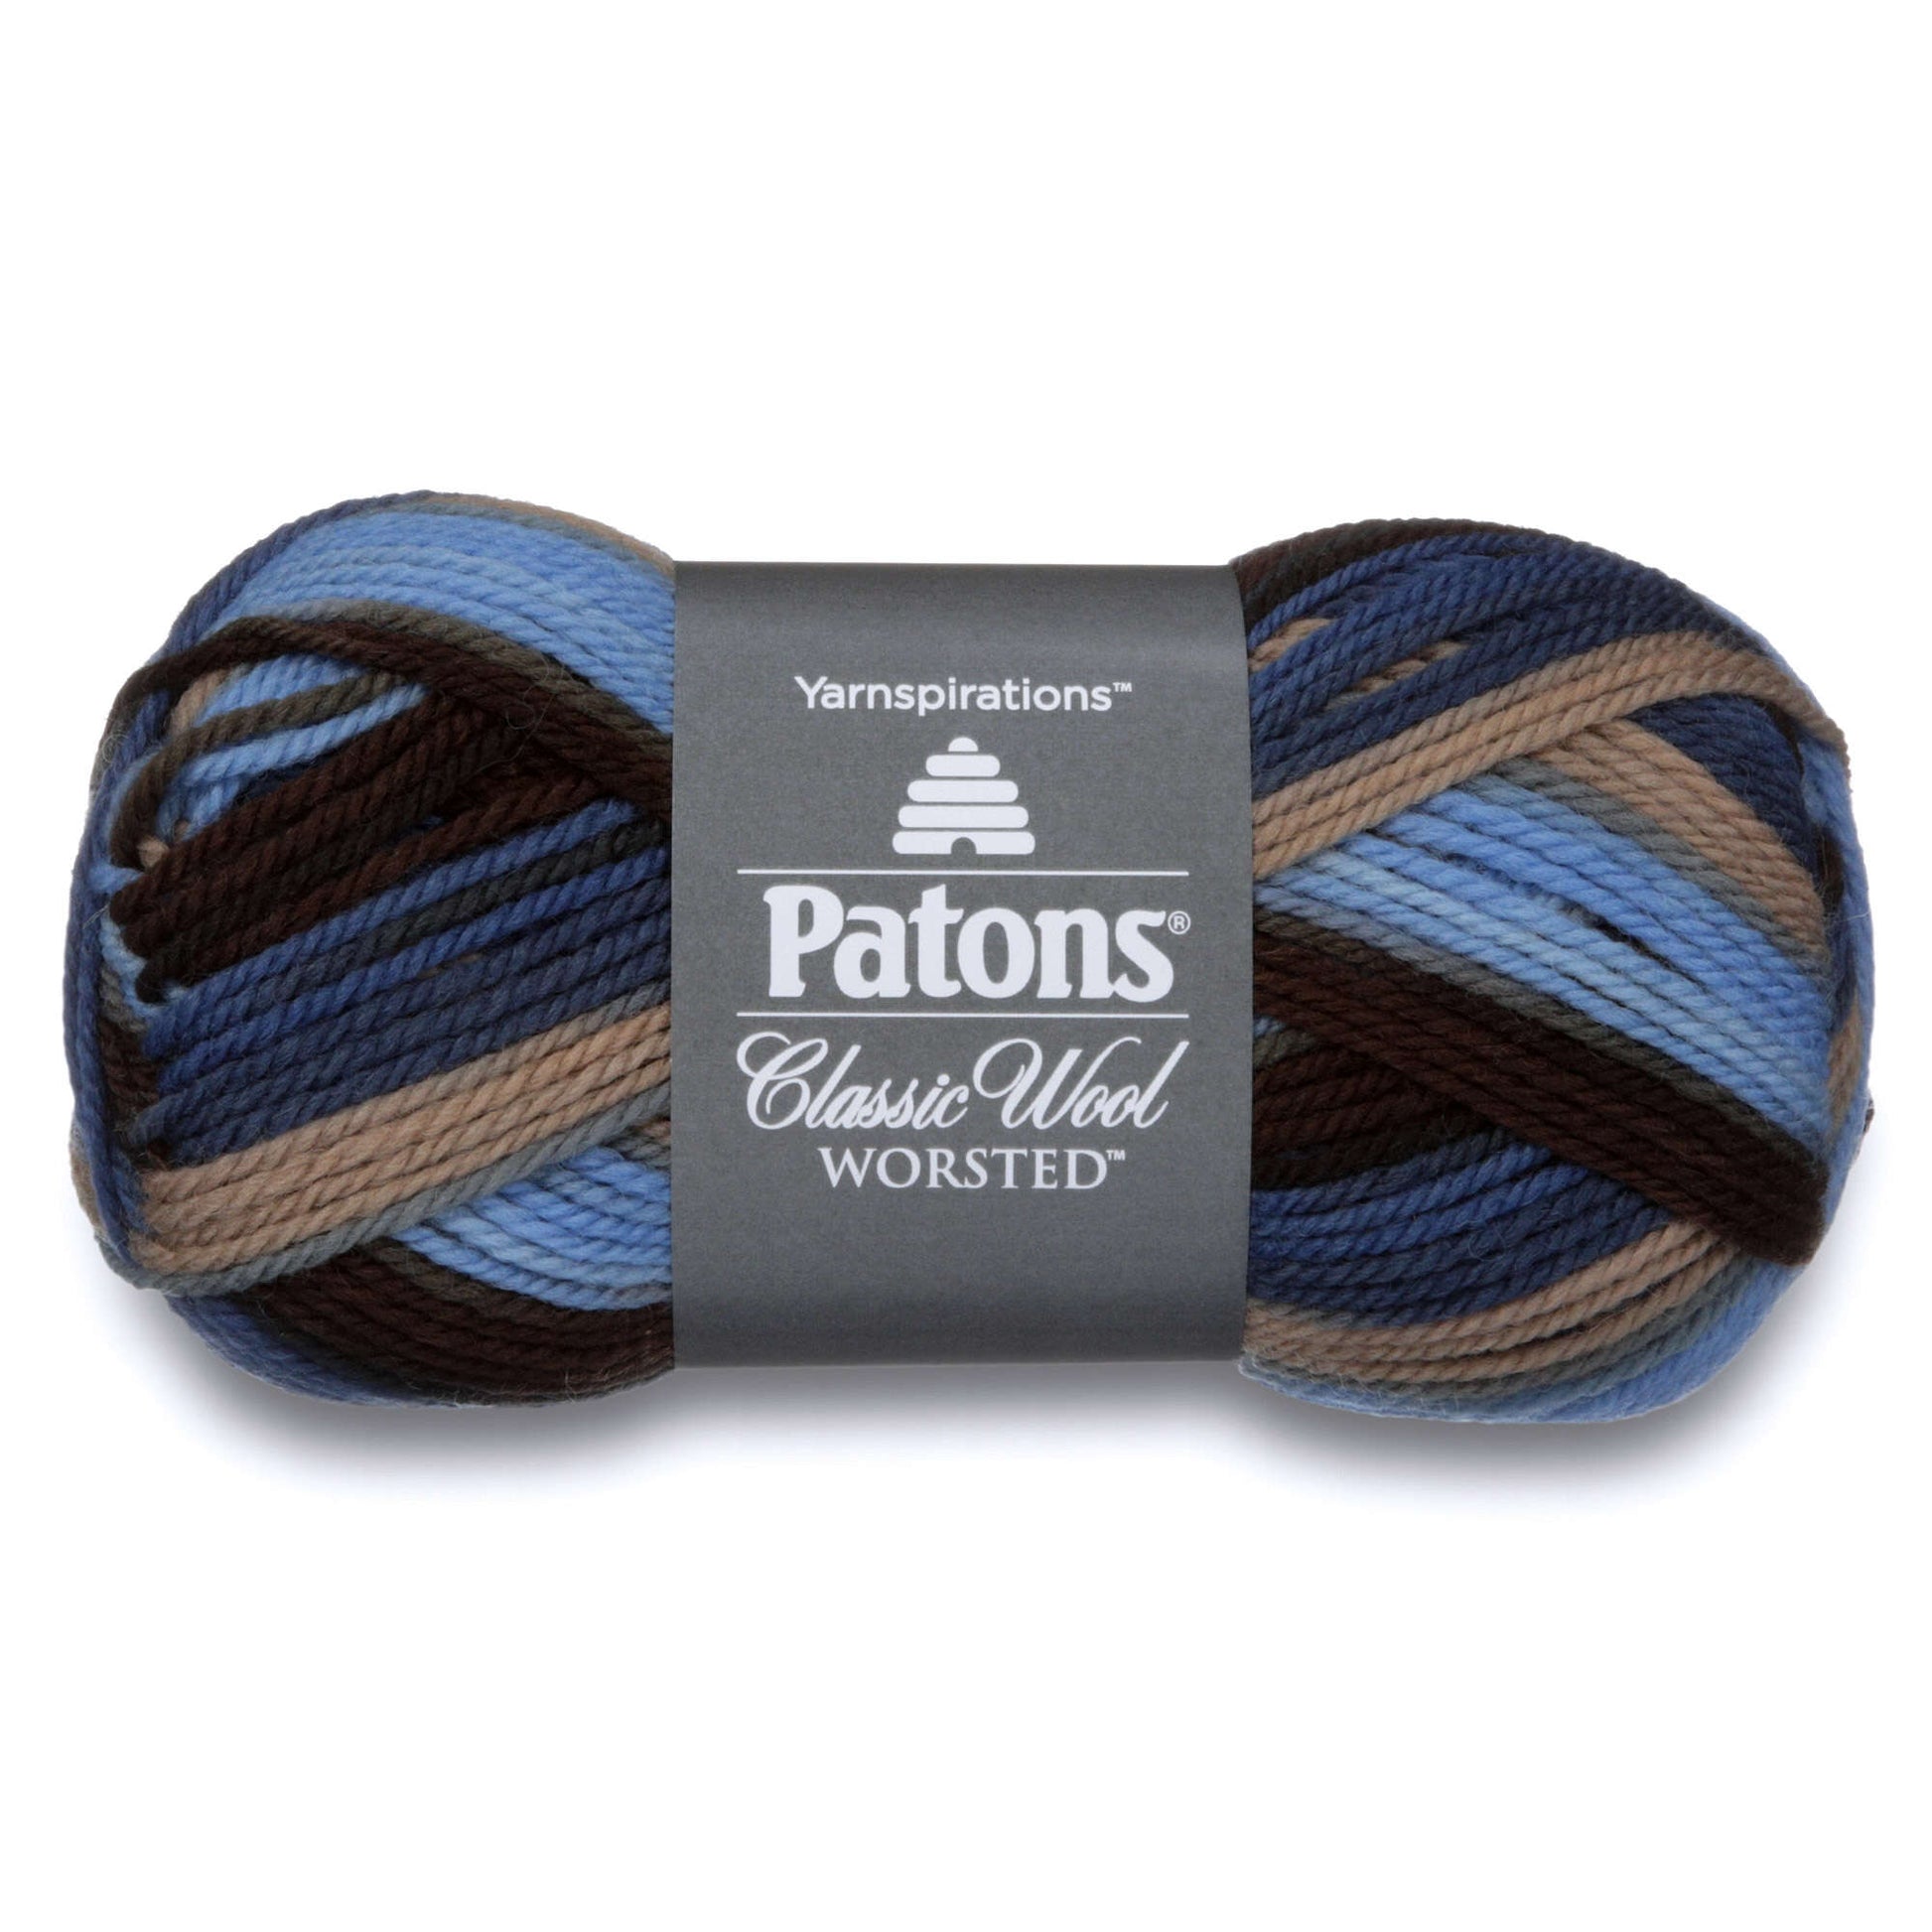 Patons Classic Wool Worsted Yarn - Discontinued Shades Wedgewood Ombre